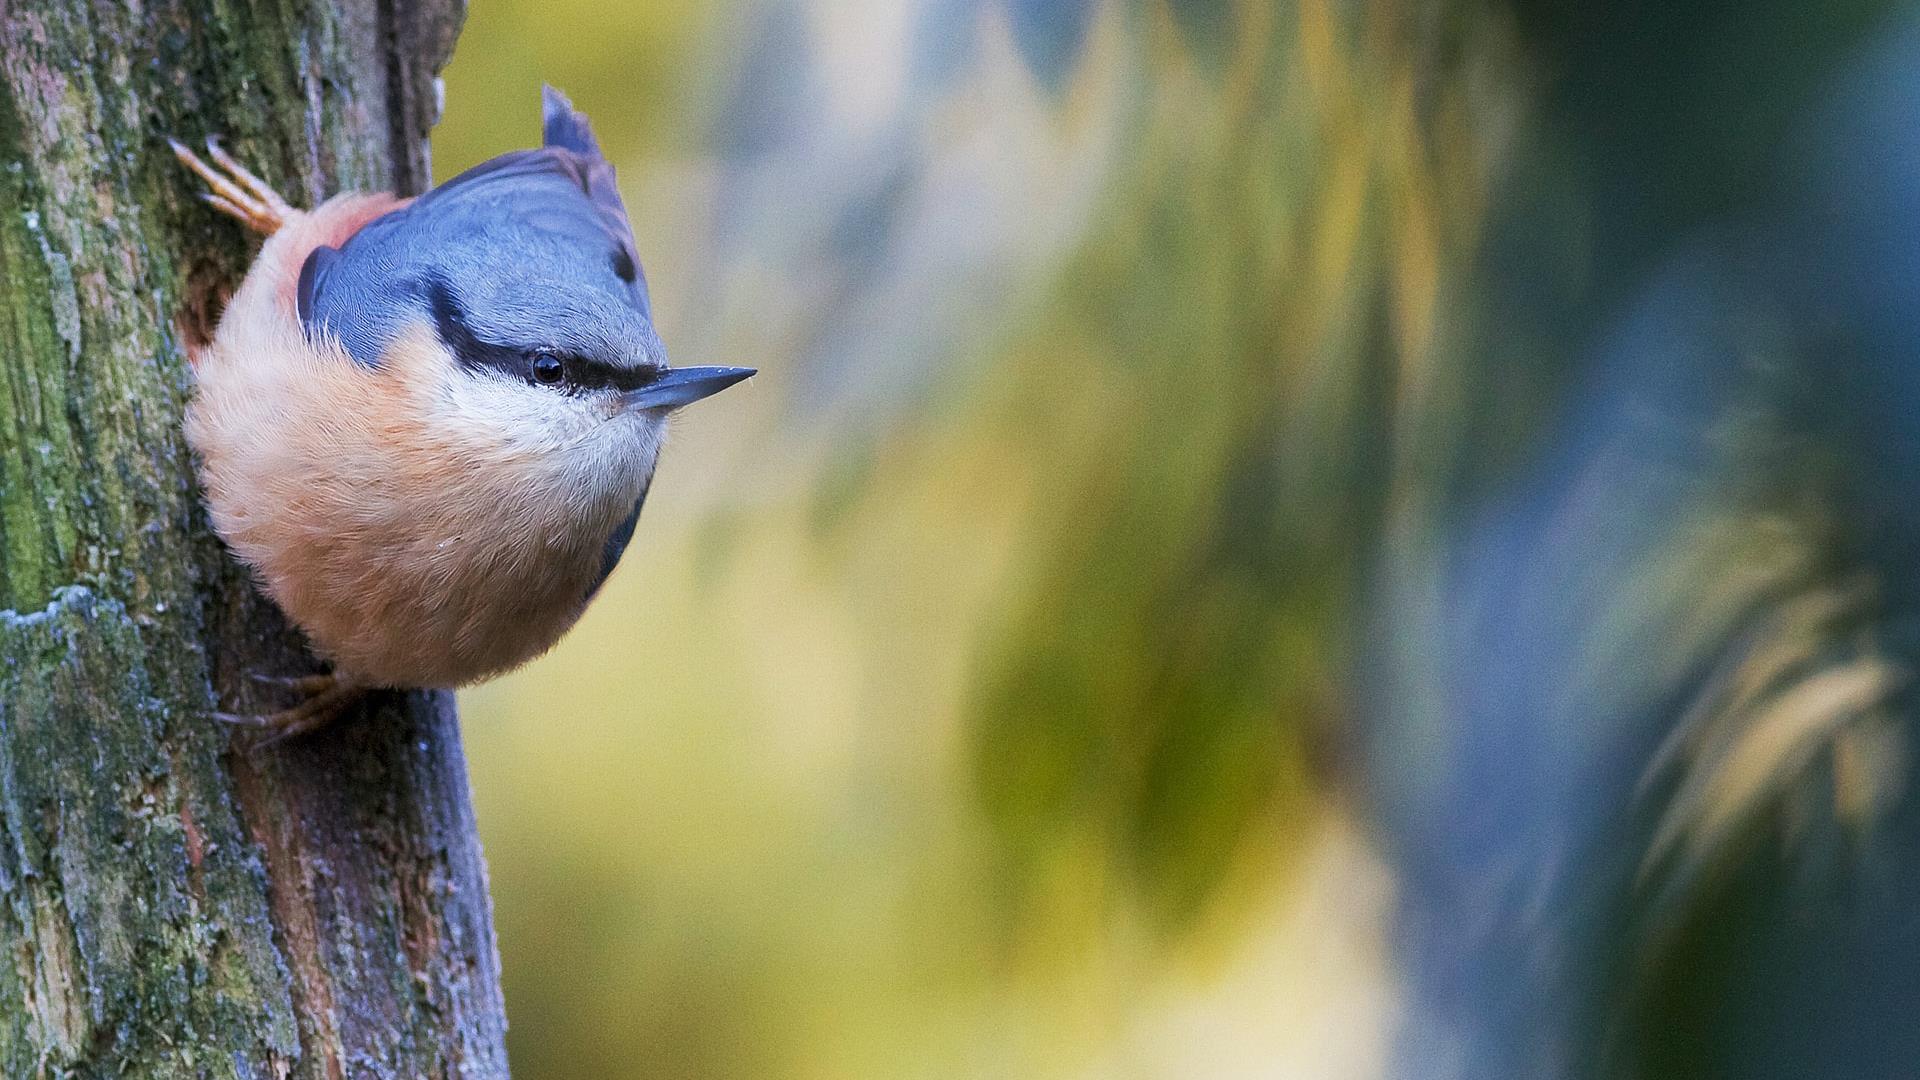 Most Beautiful Bird Songs - Birds singing in the forest 